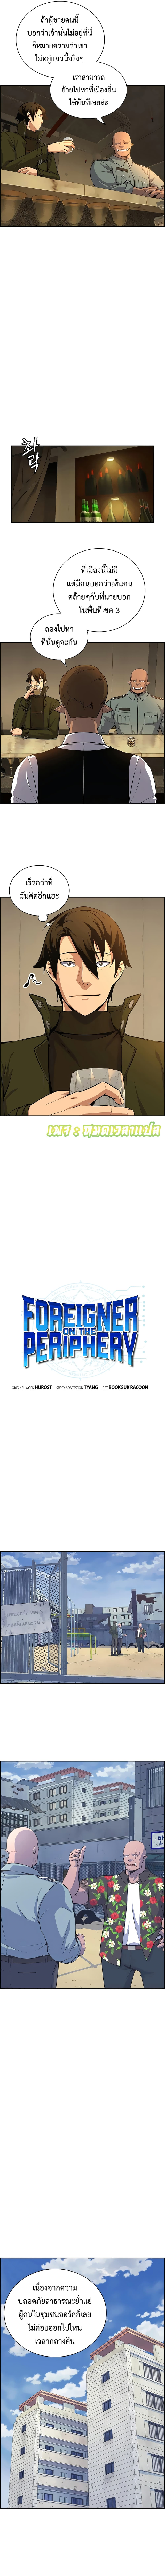 Foreigner on the Periphery 5 (2)